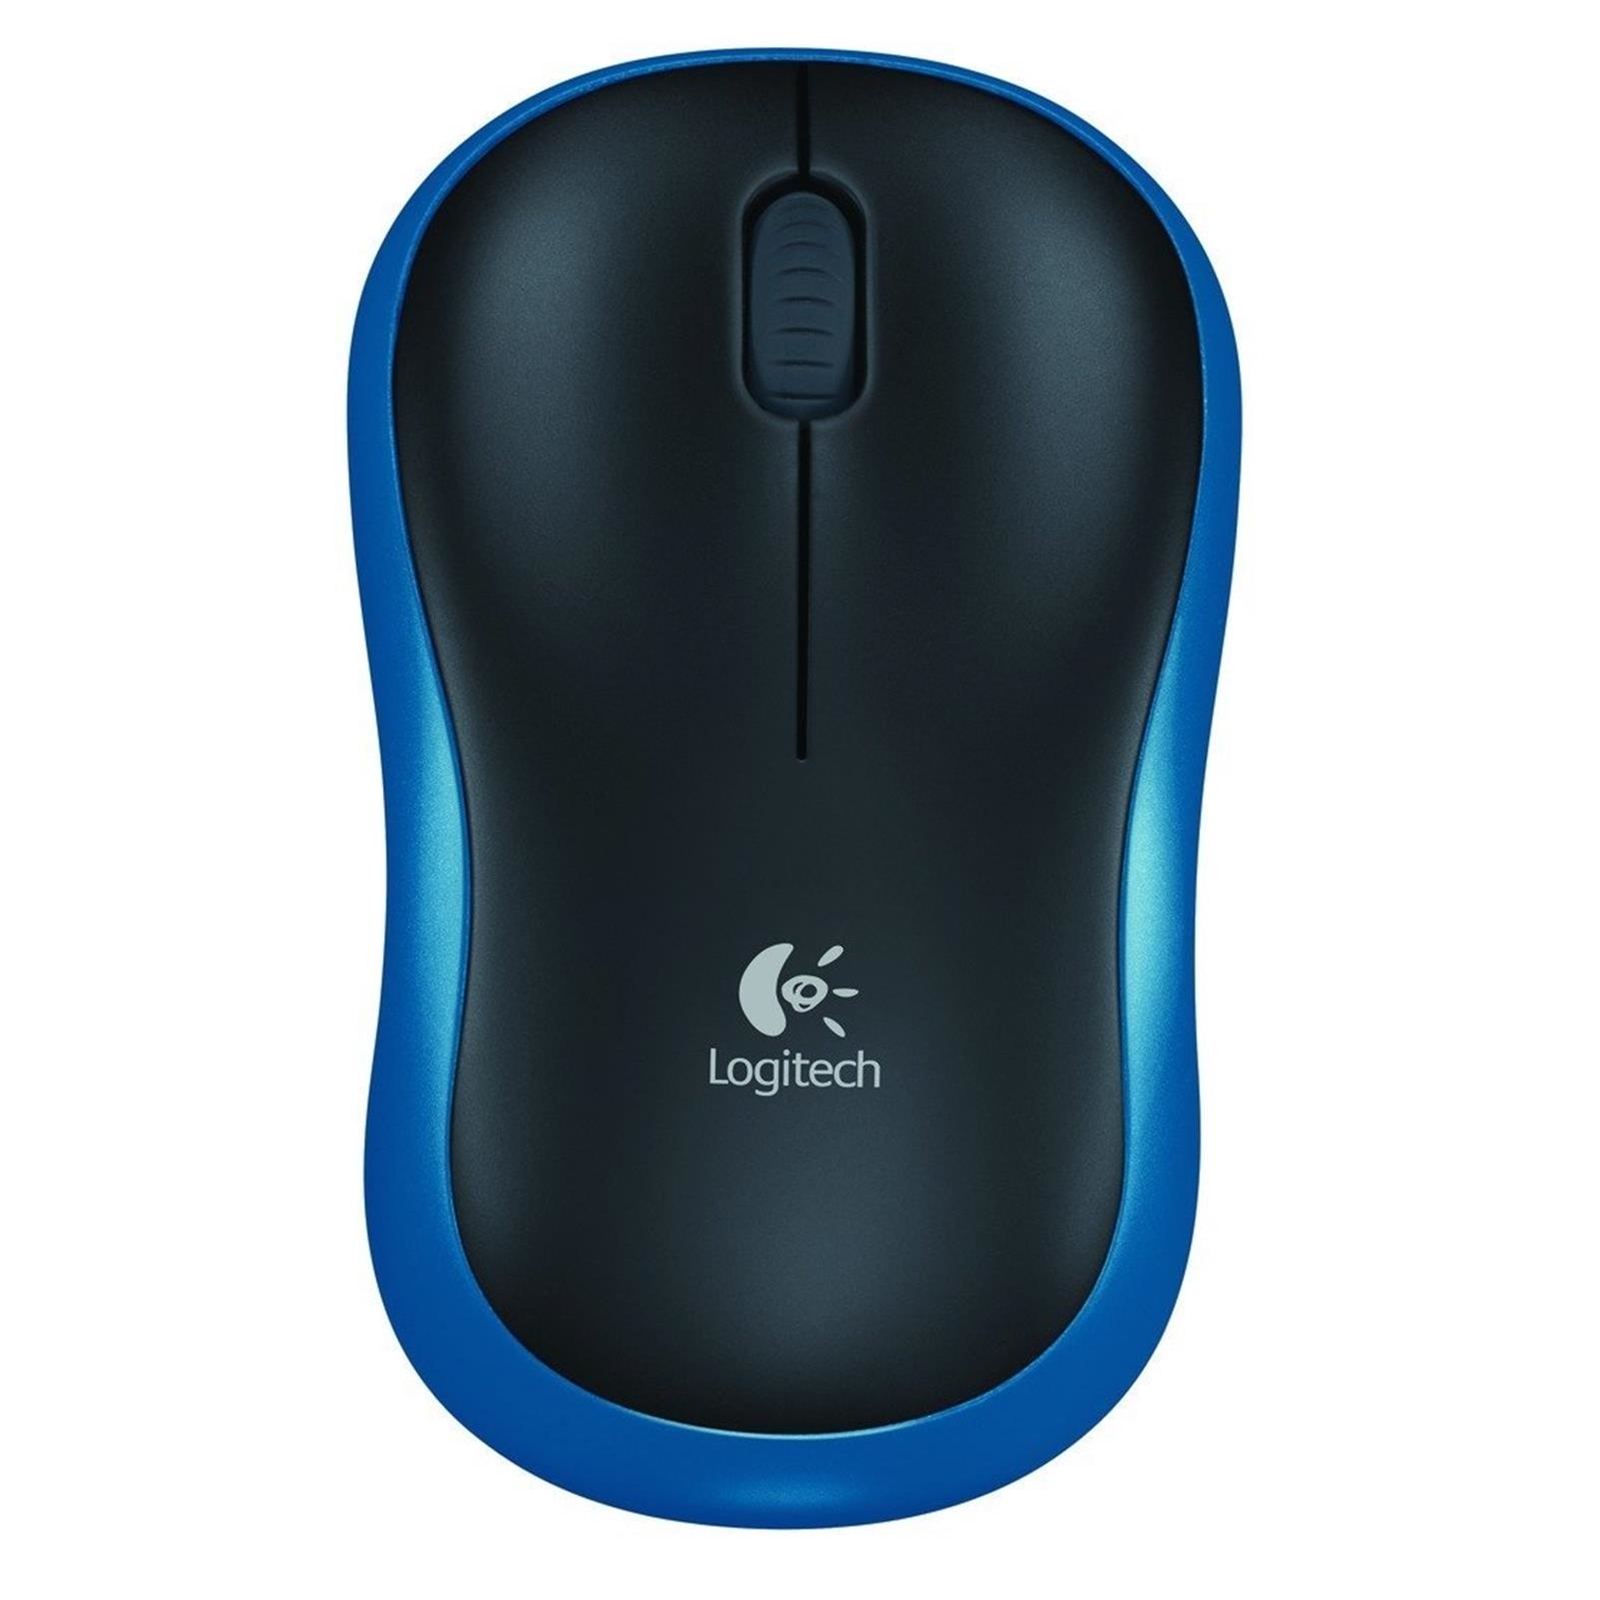 Logitech M185 Wireless Mouse, 2.4GHz with USB Mini Receiver, 12-Month Battery Life, 1000 DPI Optical Tracking, Ambidextrous, Compatible with PC, Mac, Laptop, Black and Blue